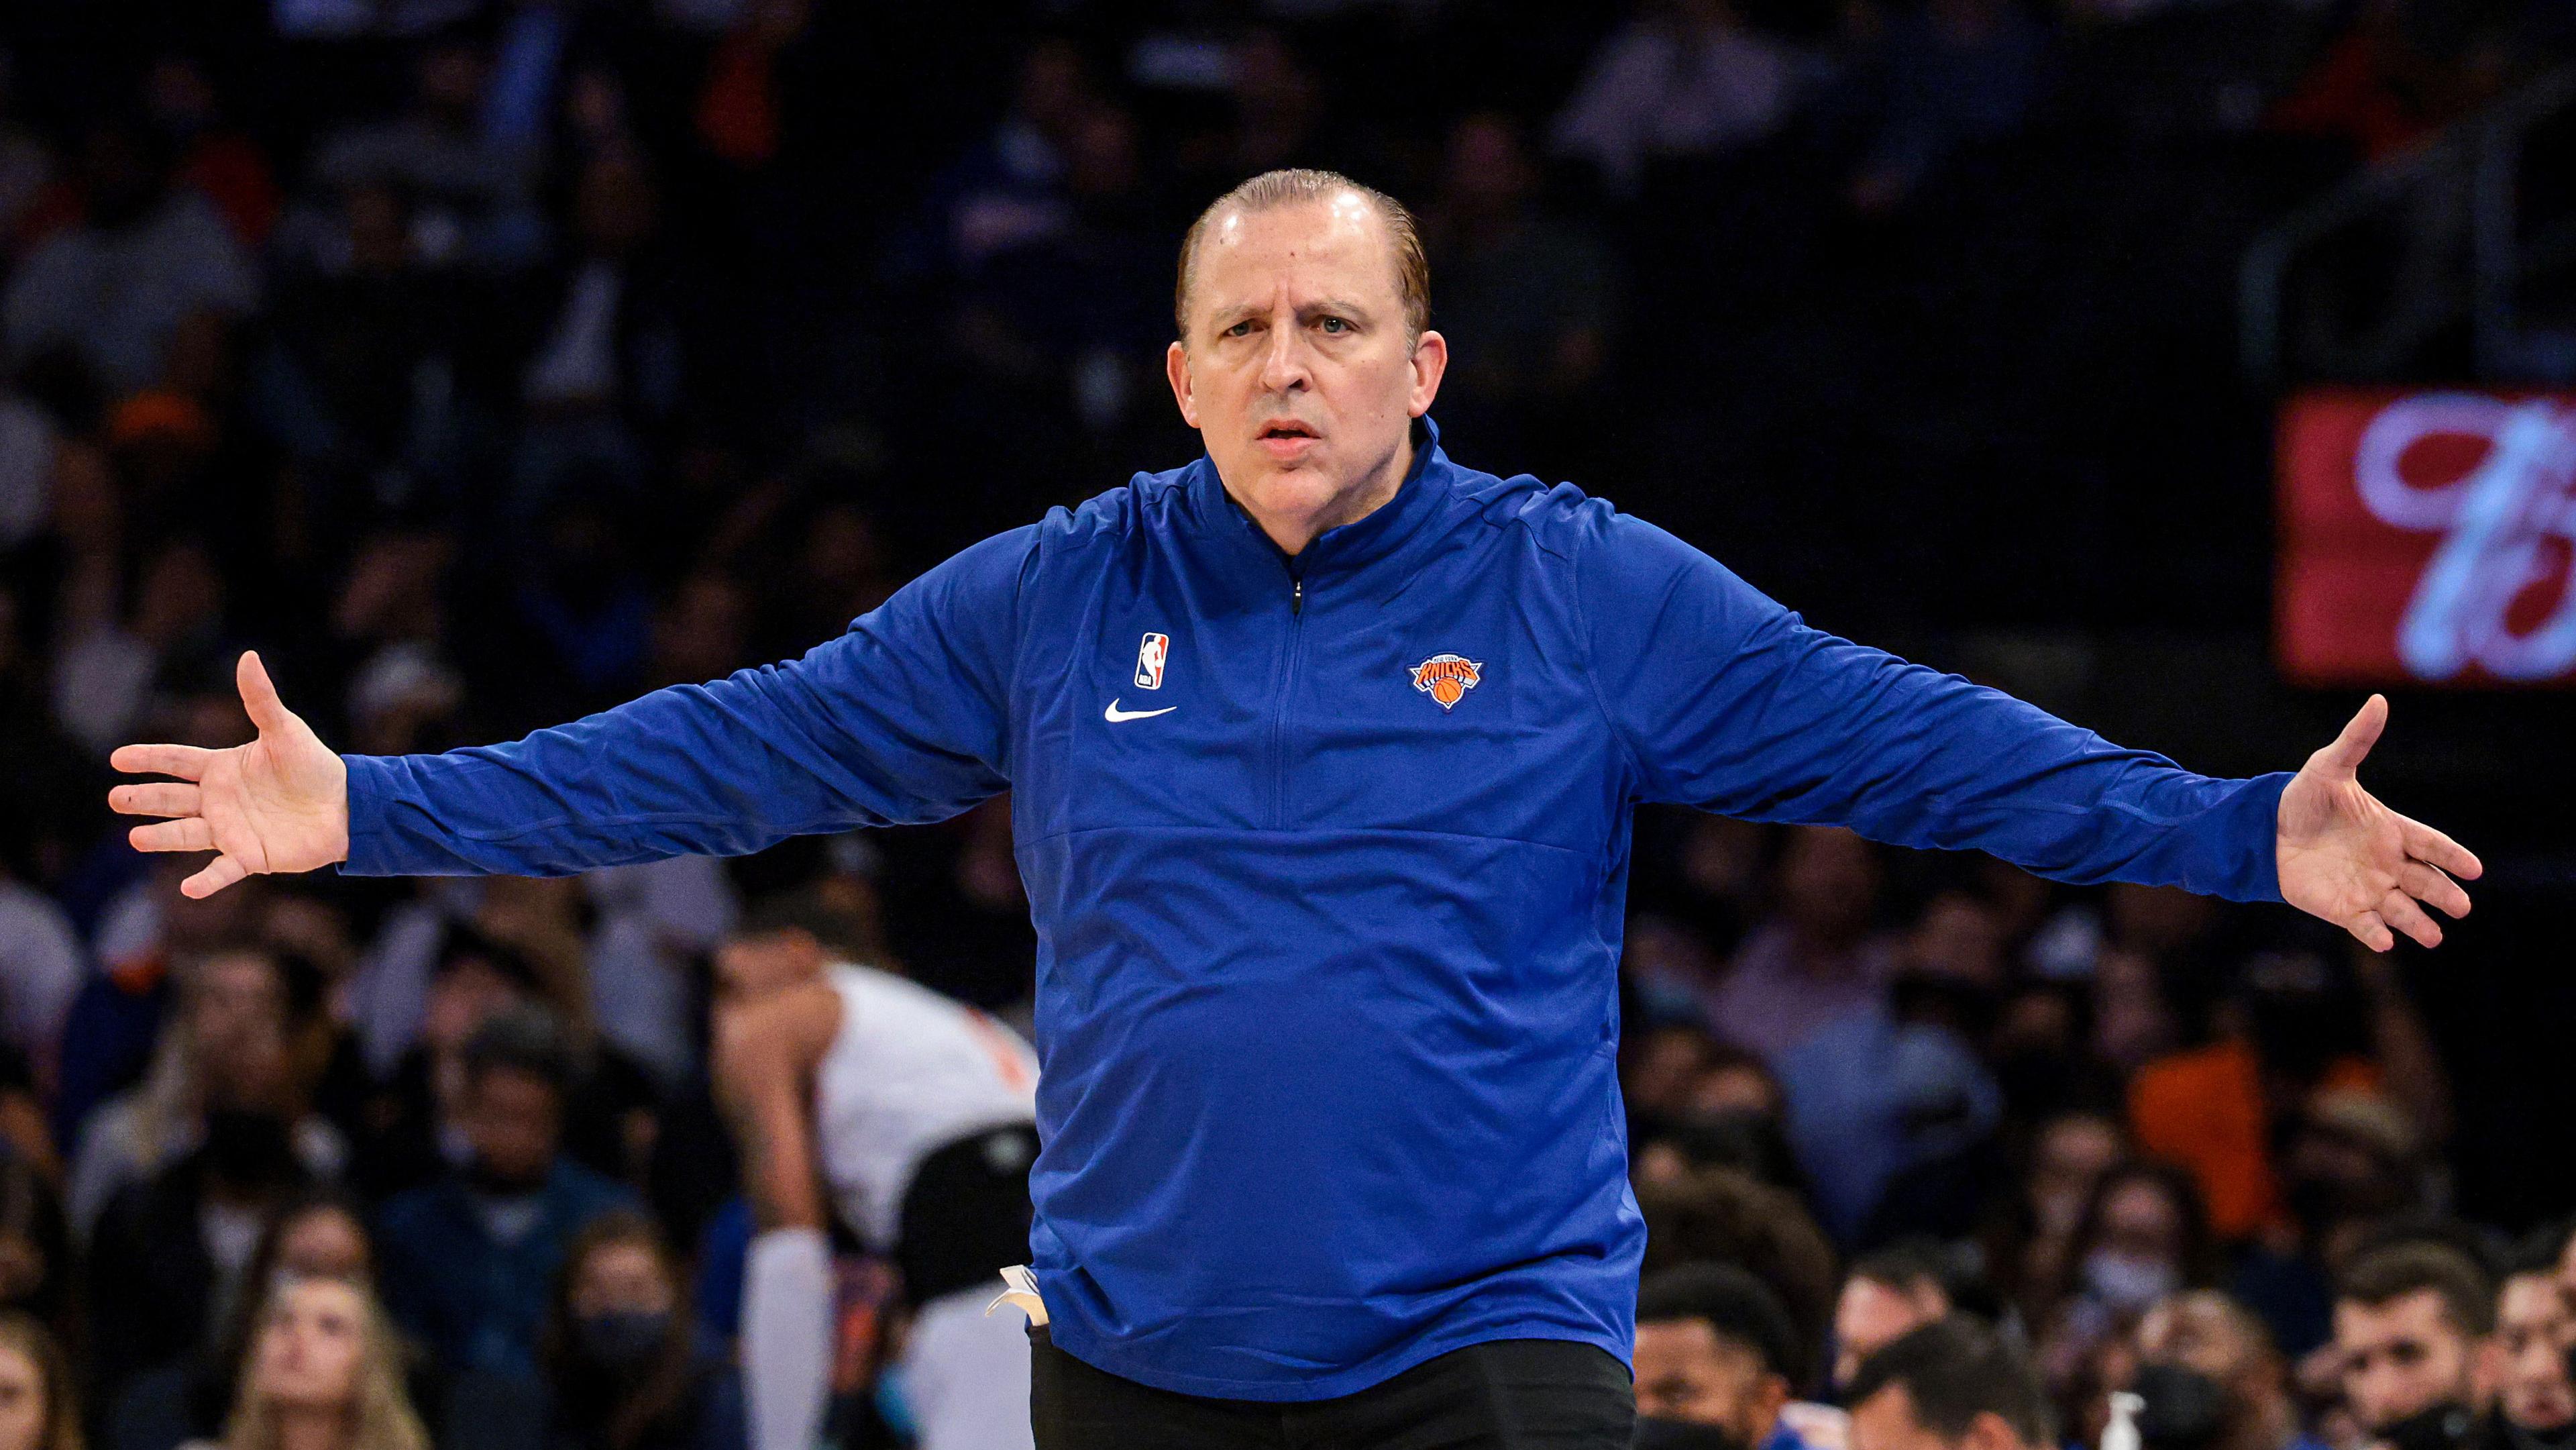 Oct 13, 2021; New York, New York, USA; New York Knicks head coach Tom Thibodeau reacts after a call during the first half against the Detroit Pistons at Madison Square Garden. / Vincent Carchietta-USA TODAY Sports